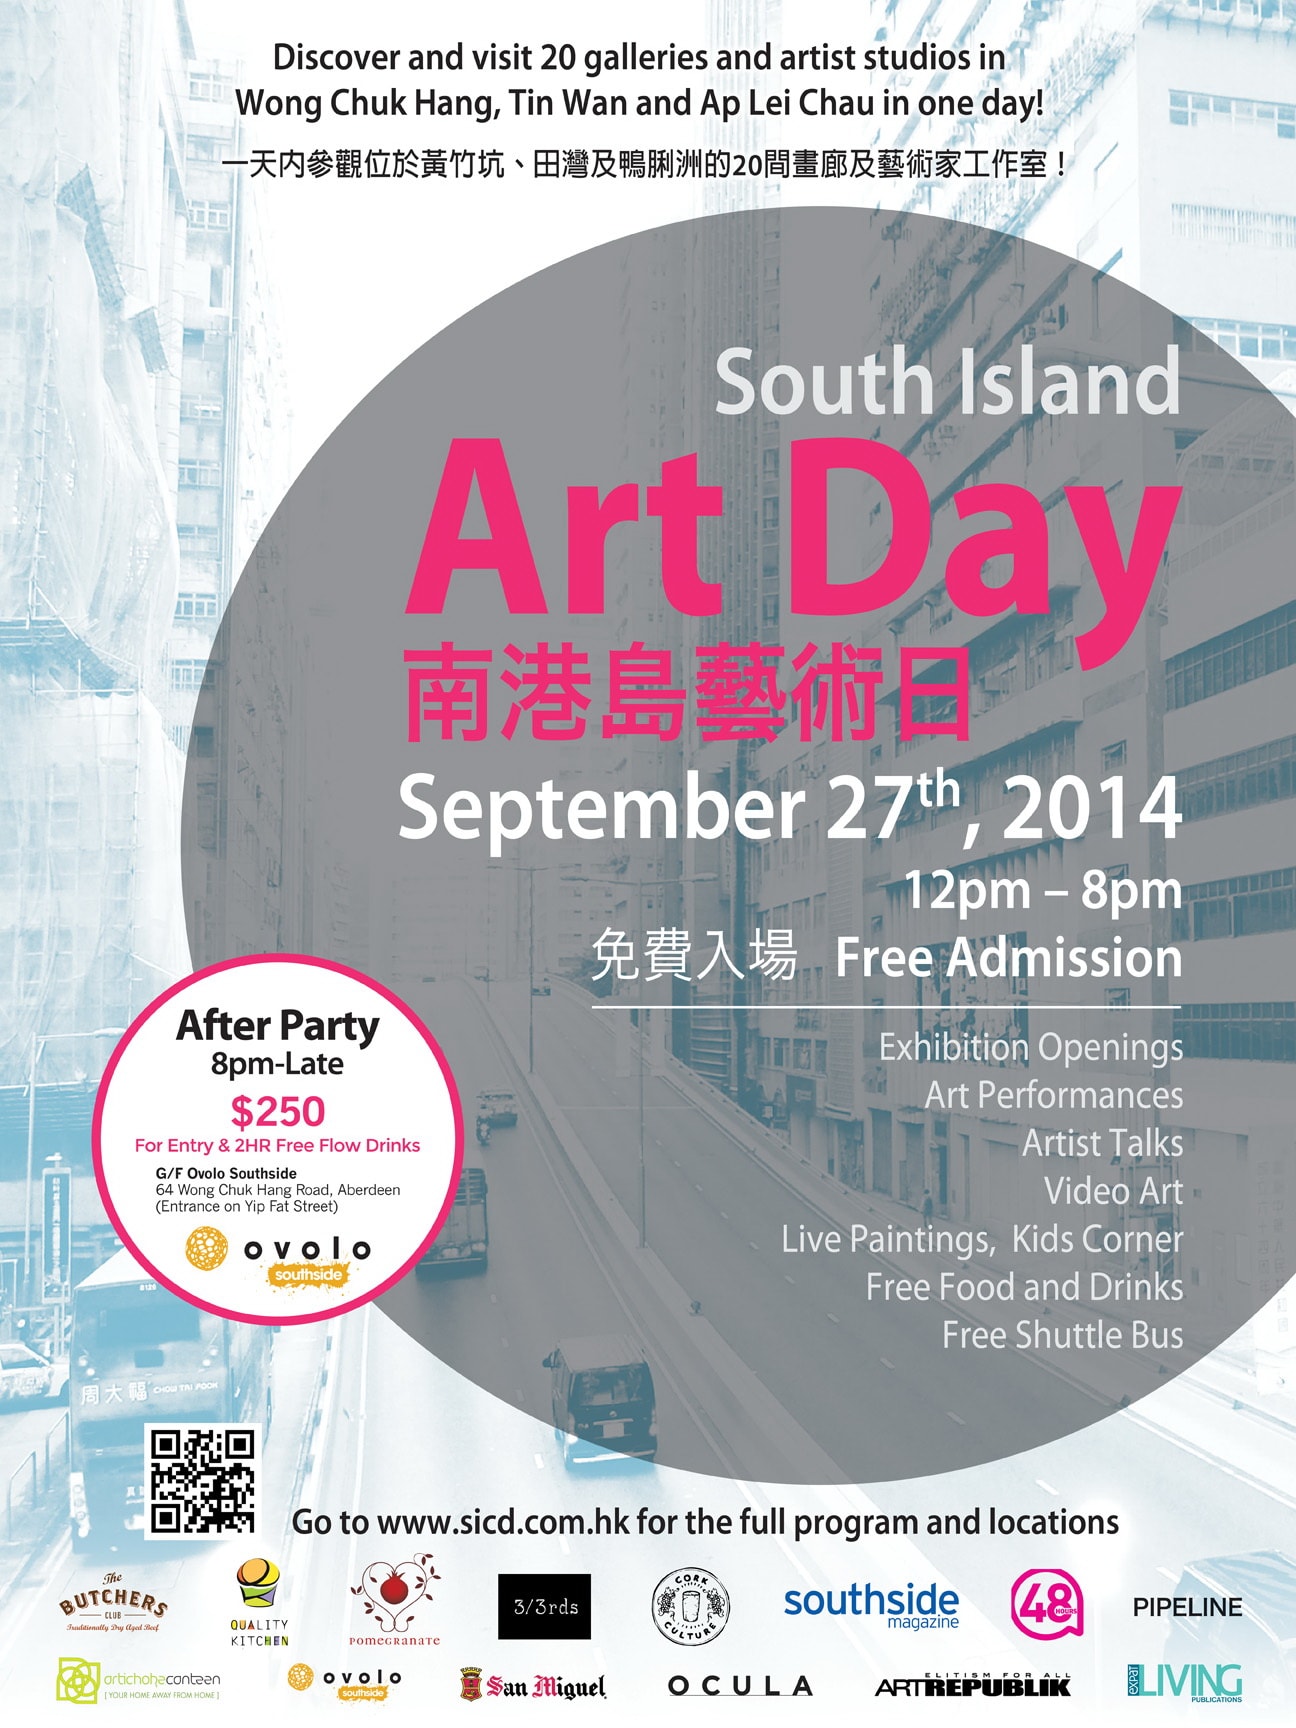 South Island Art Day on 27 Sept 2014